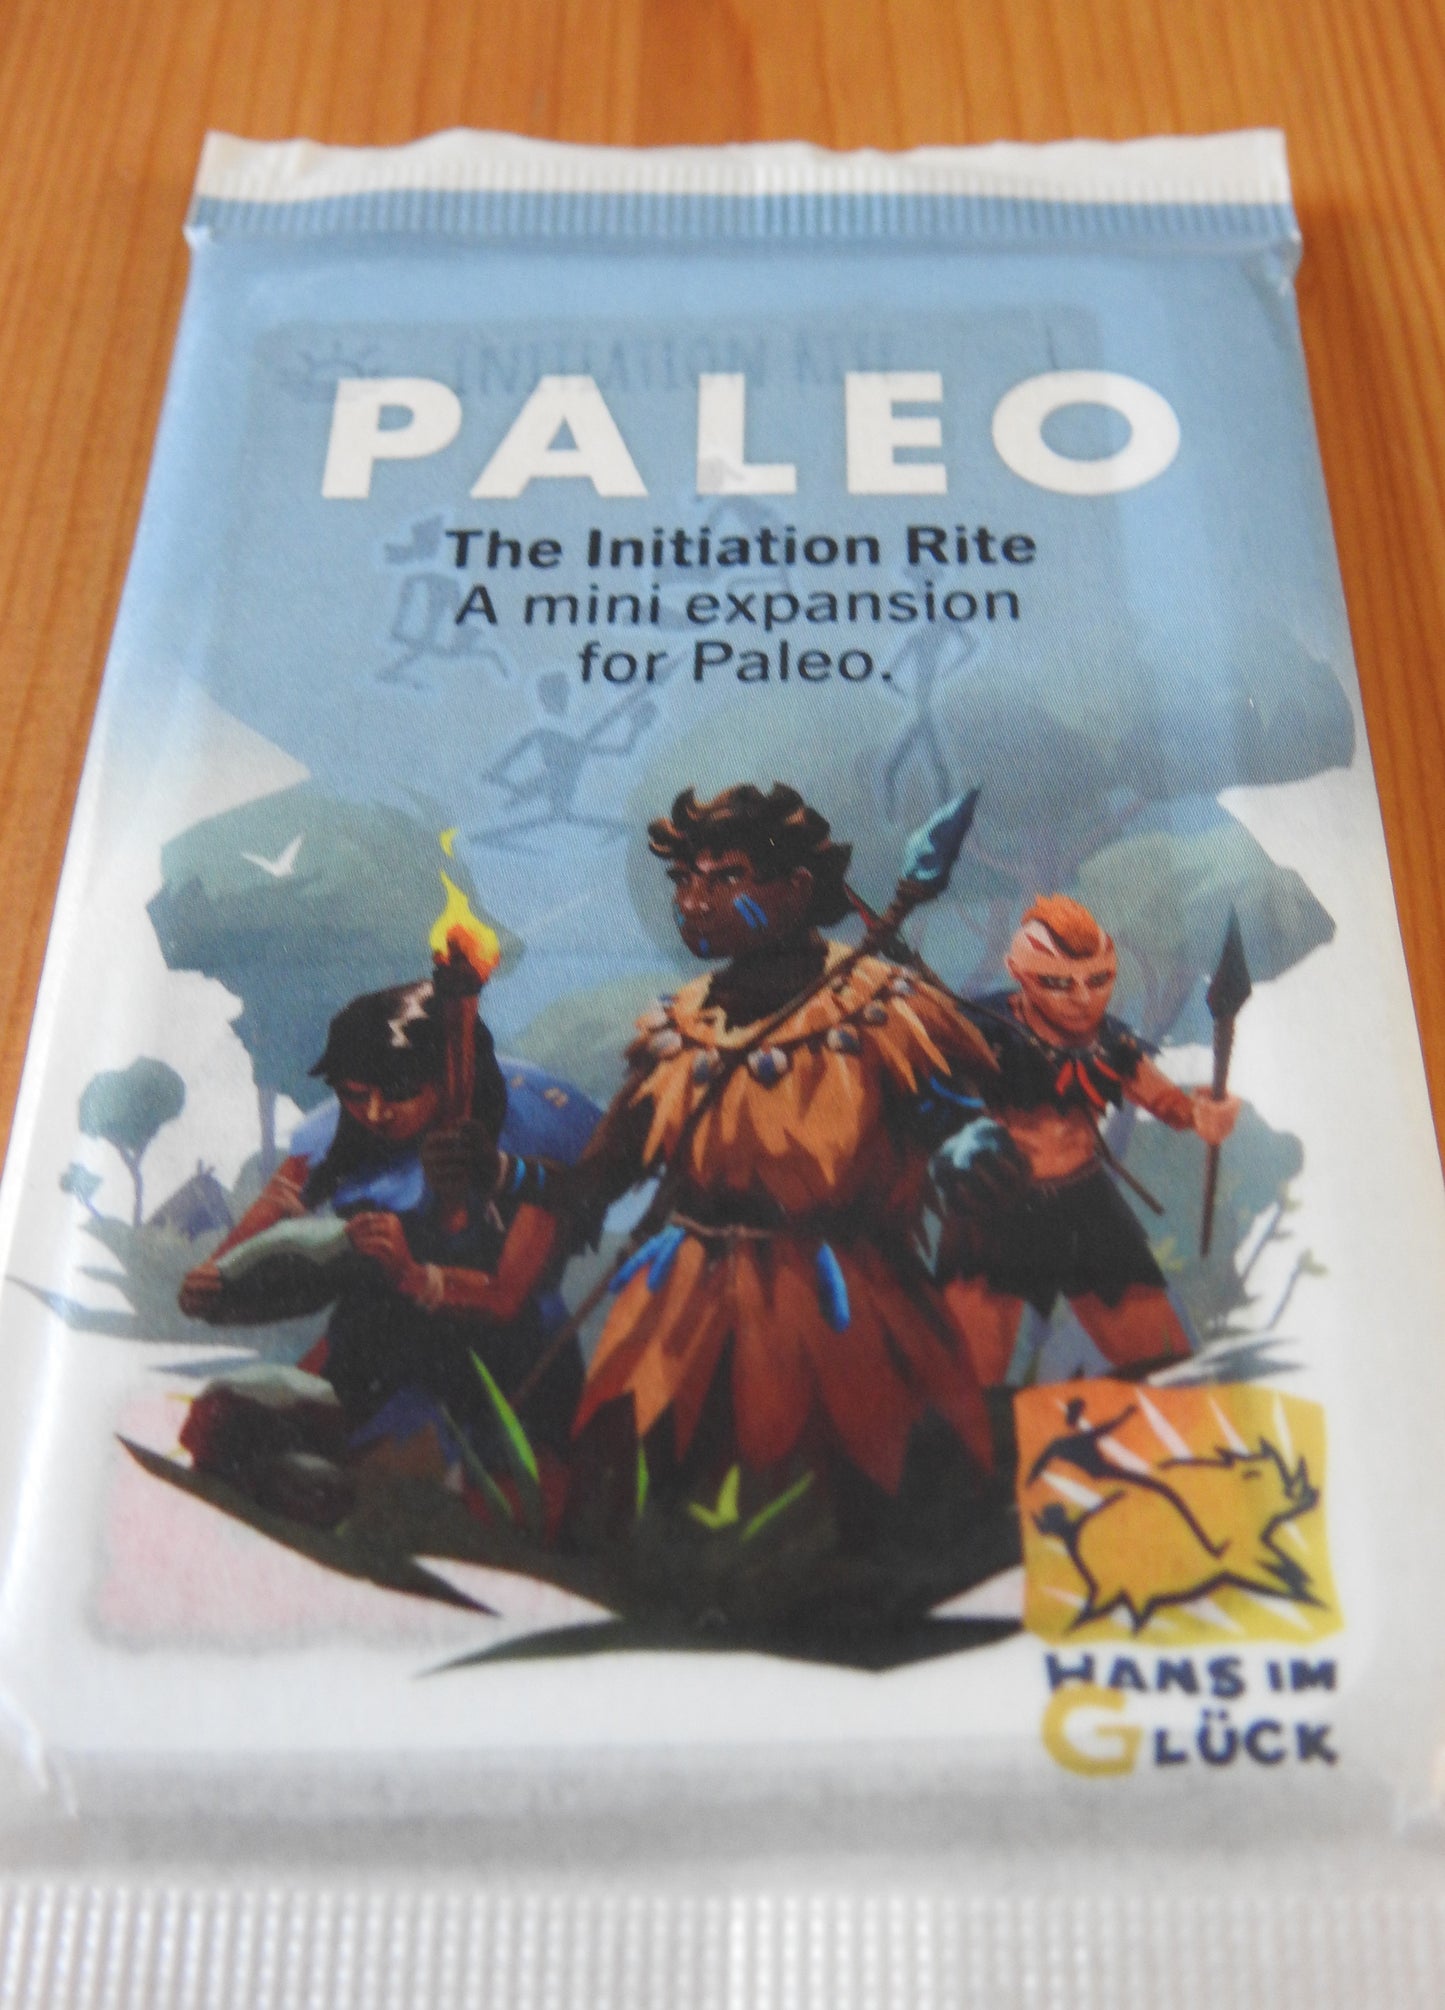 Closer view of the deck of cards that make up this Paleo Initiation Rite mini expansion.